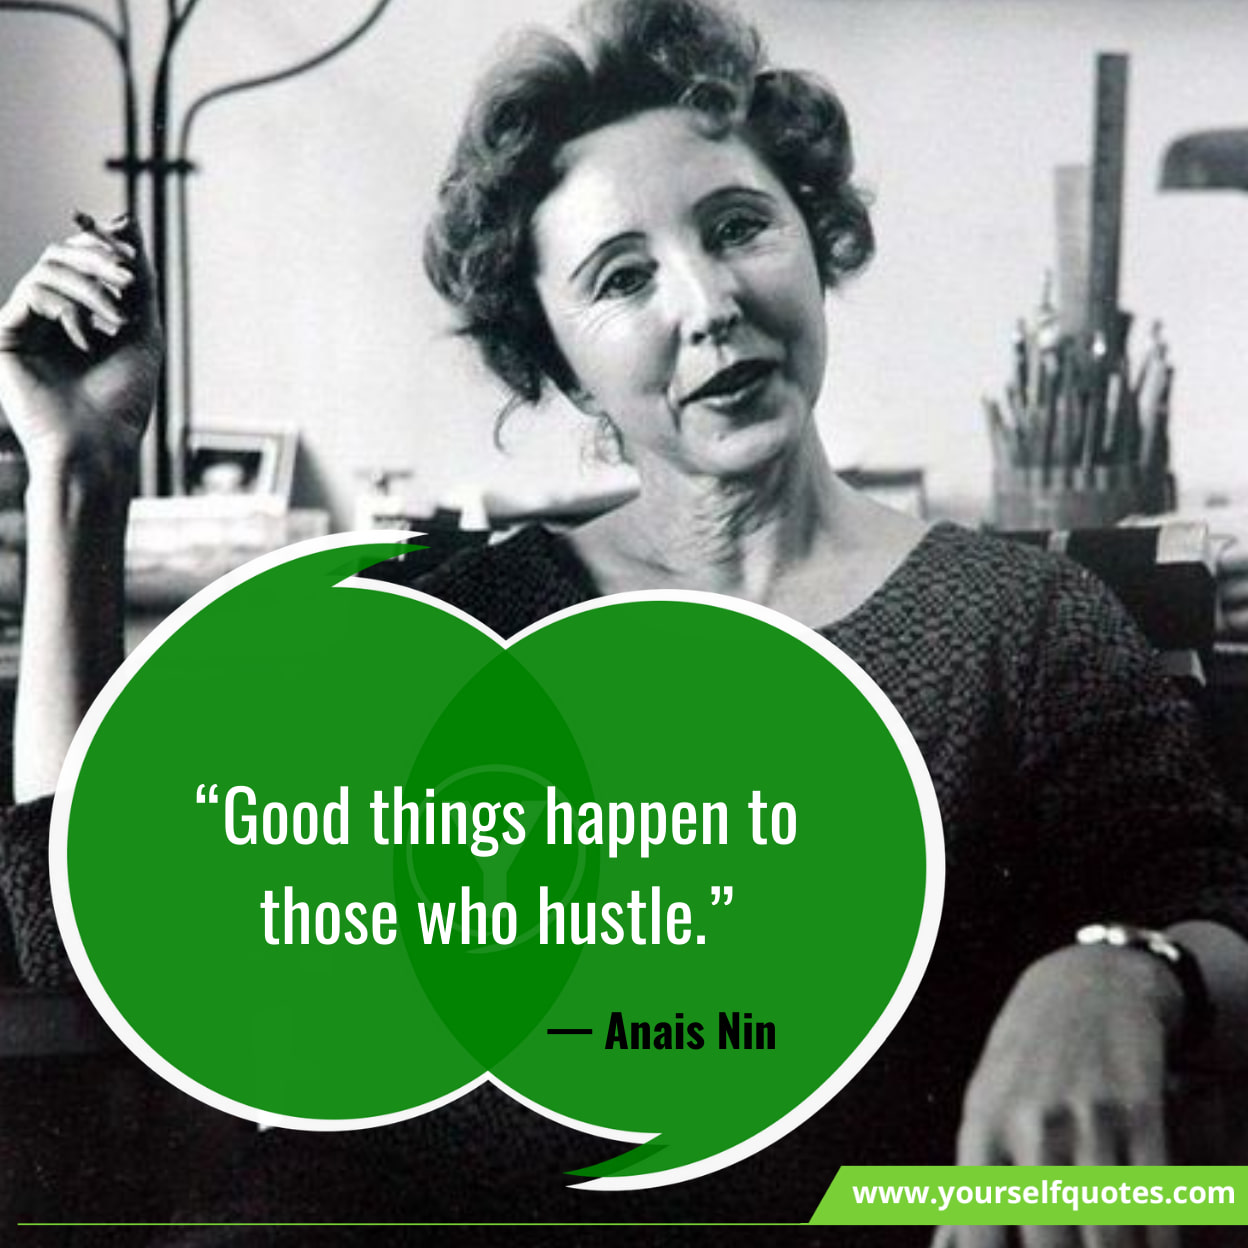 Hustle Small Business Quotes